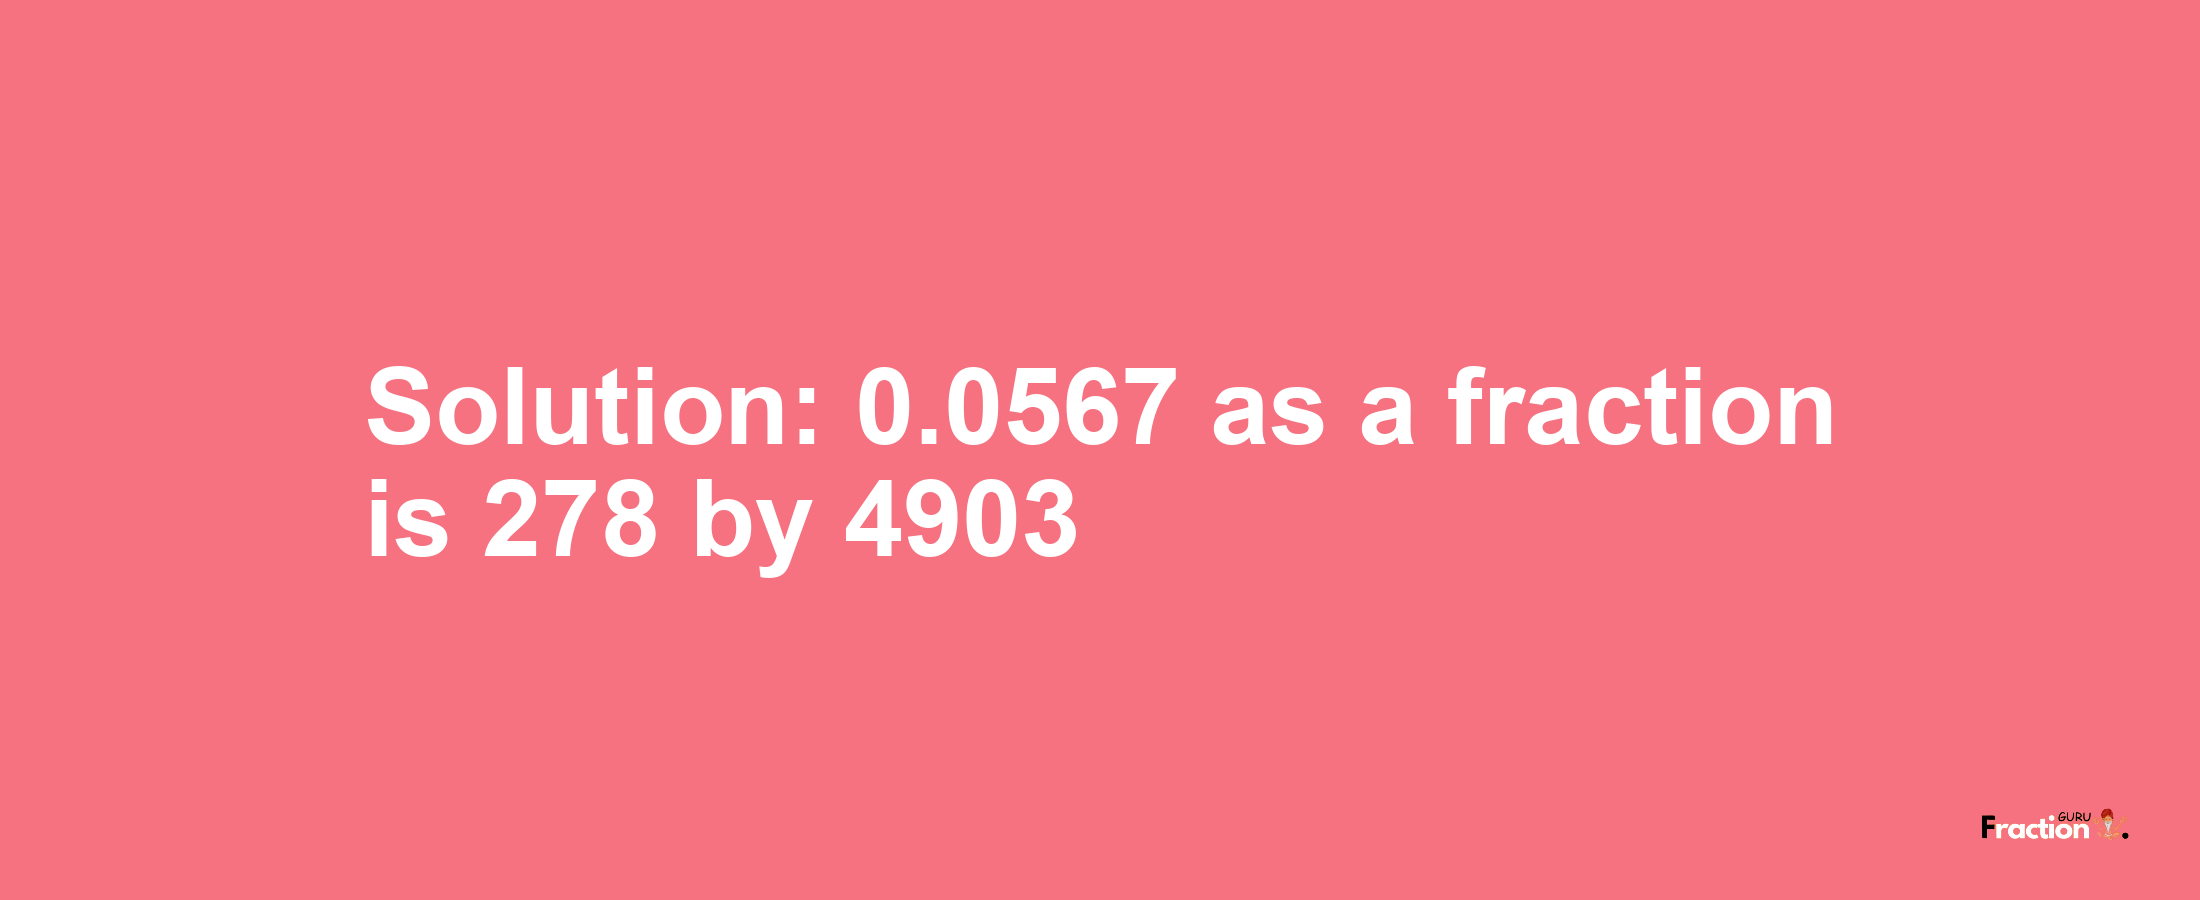 Solution:0.0567 as a fraction is 278/4903